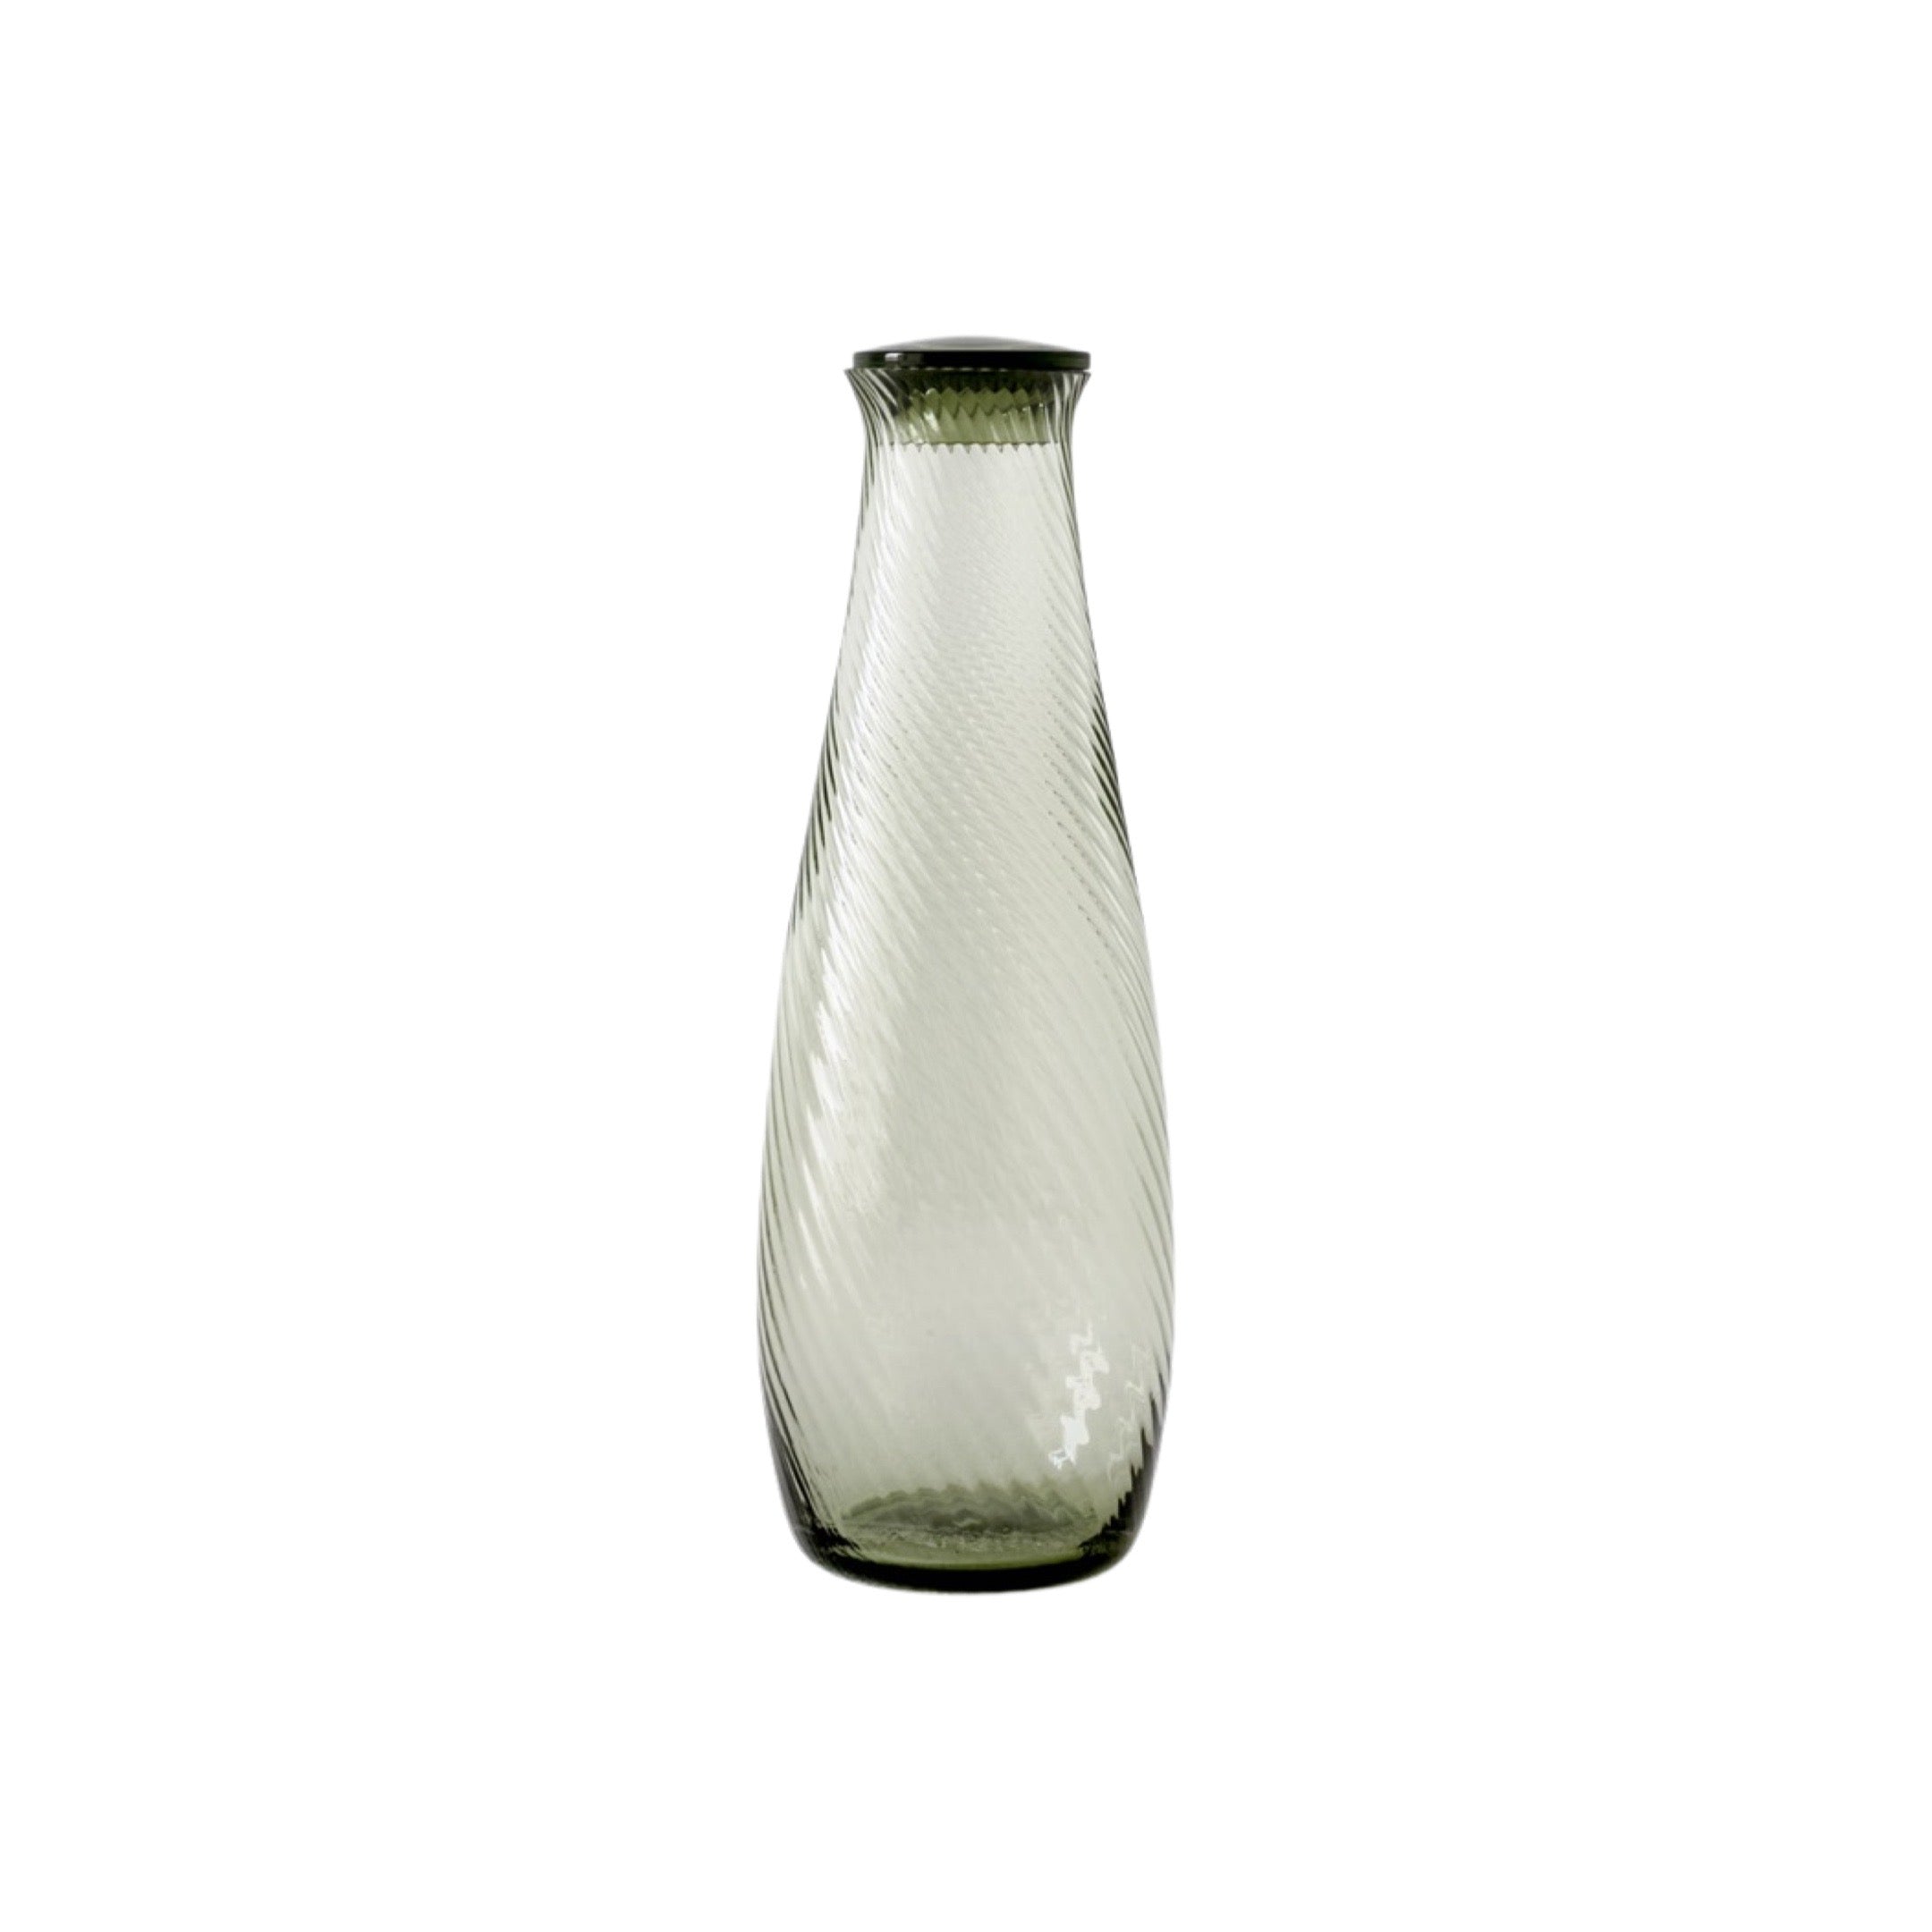 &Tradition Collect SC62 Carafe - 800ml